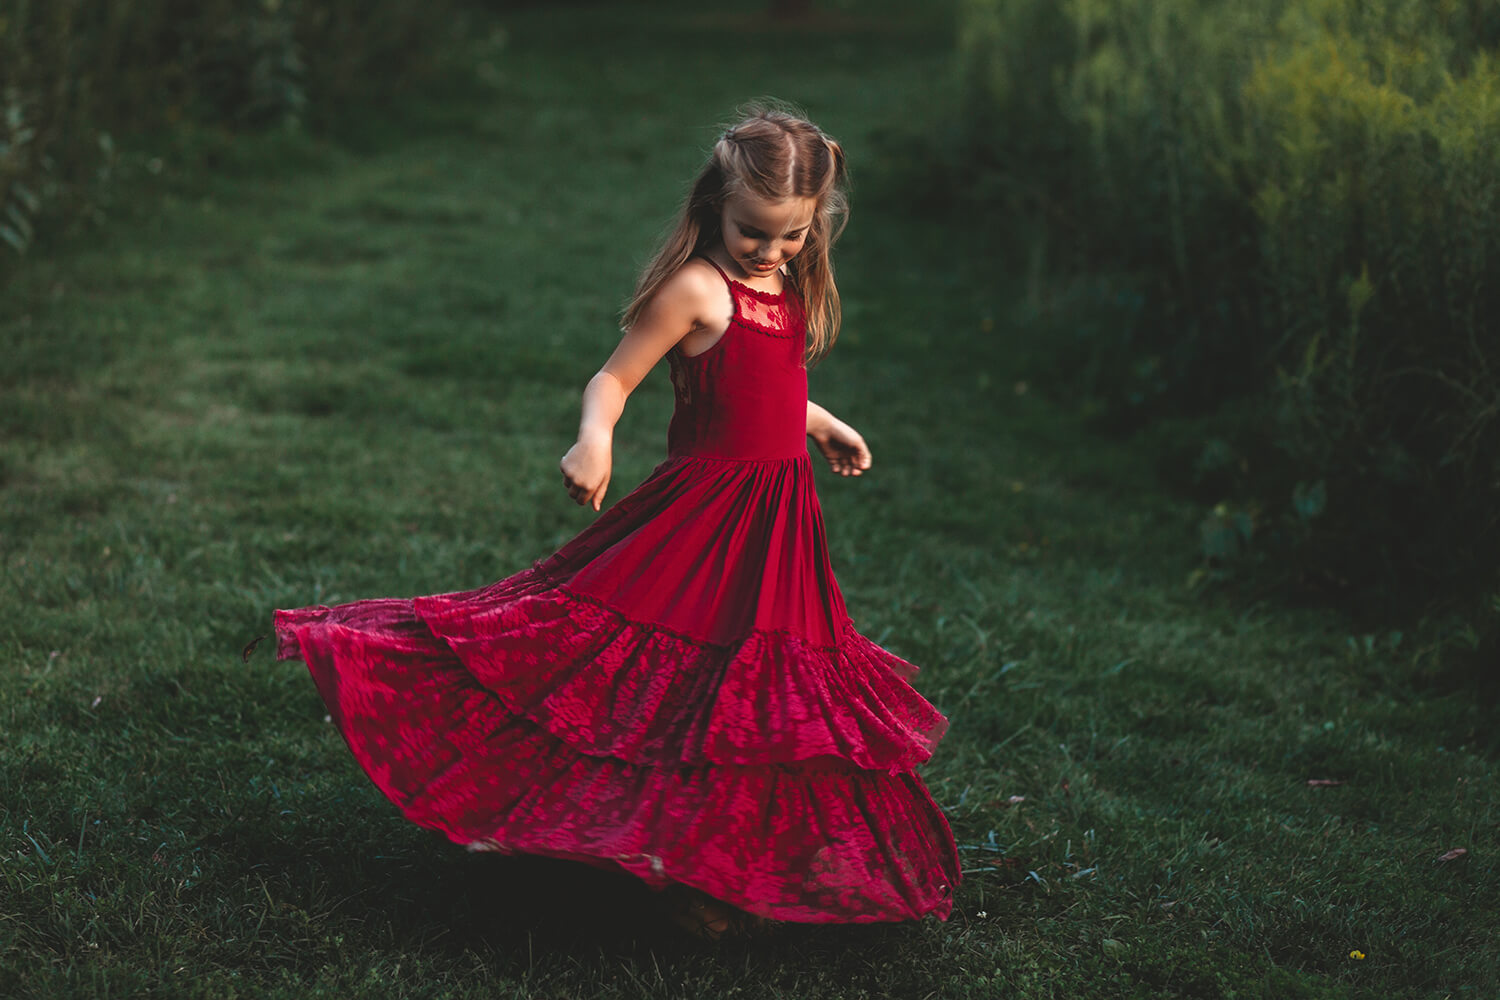 Family photo of daughter in red dress.